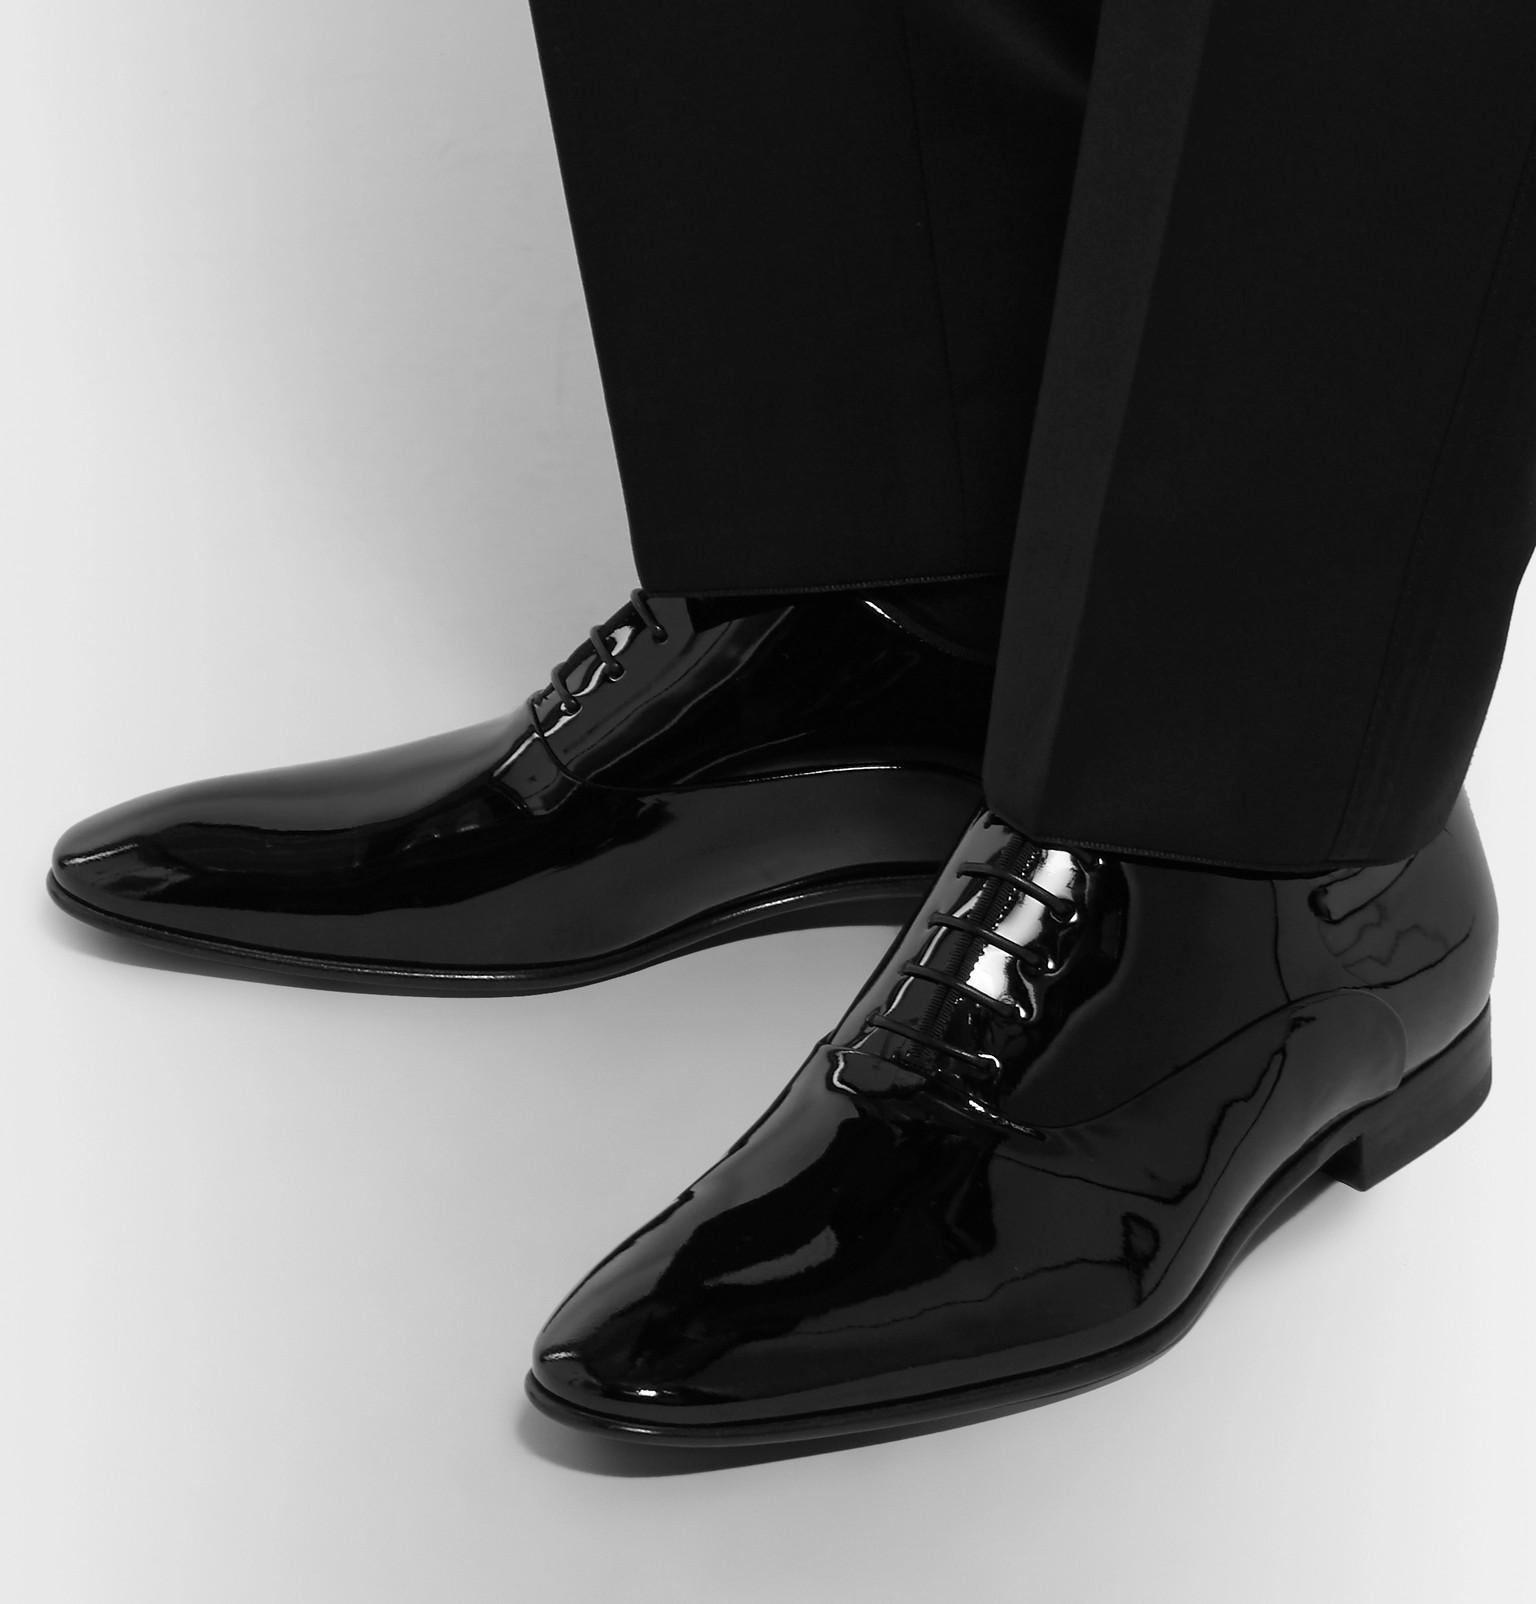 hugo boss patent leather oxfords